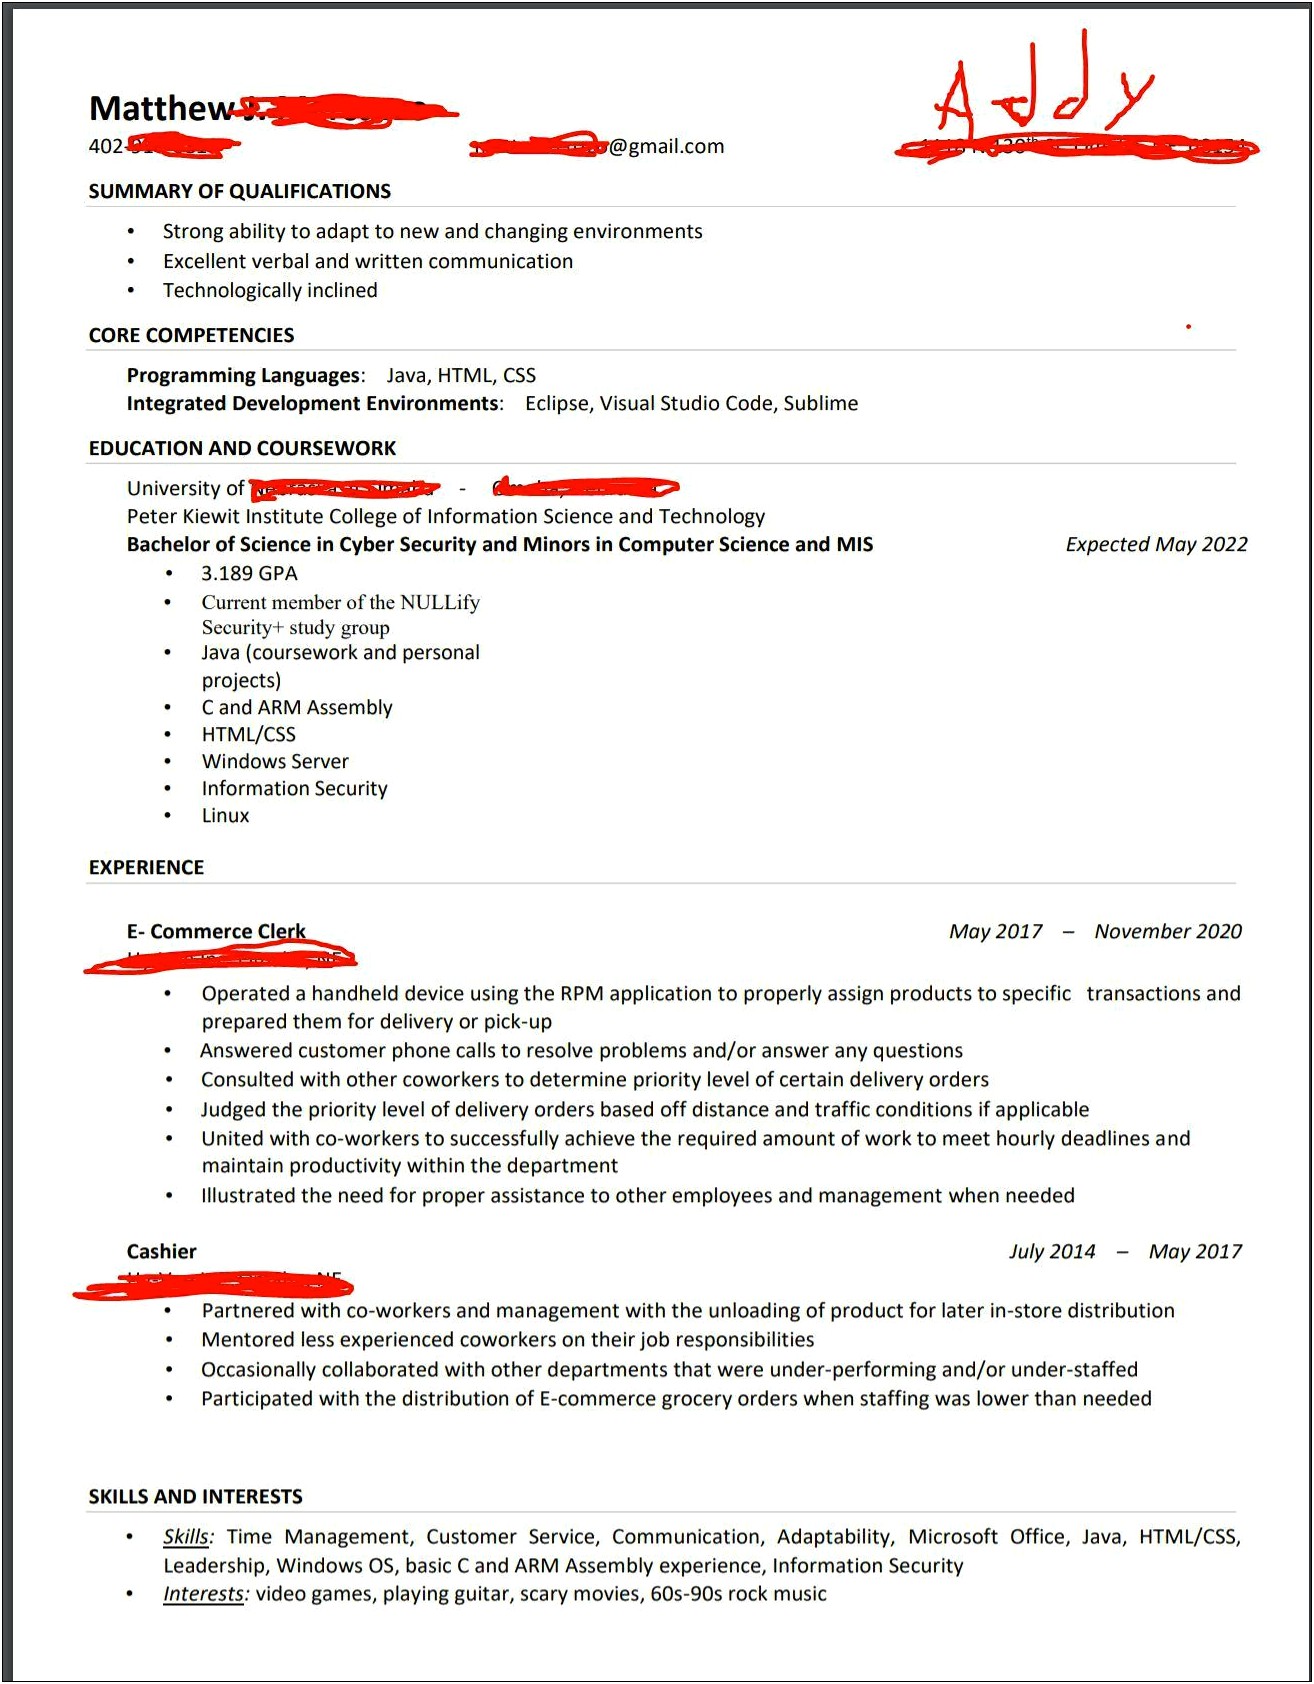 Resume Work Experience Not Relevant To Career